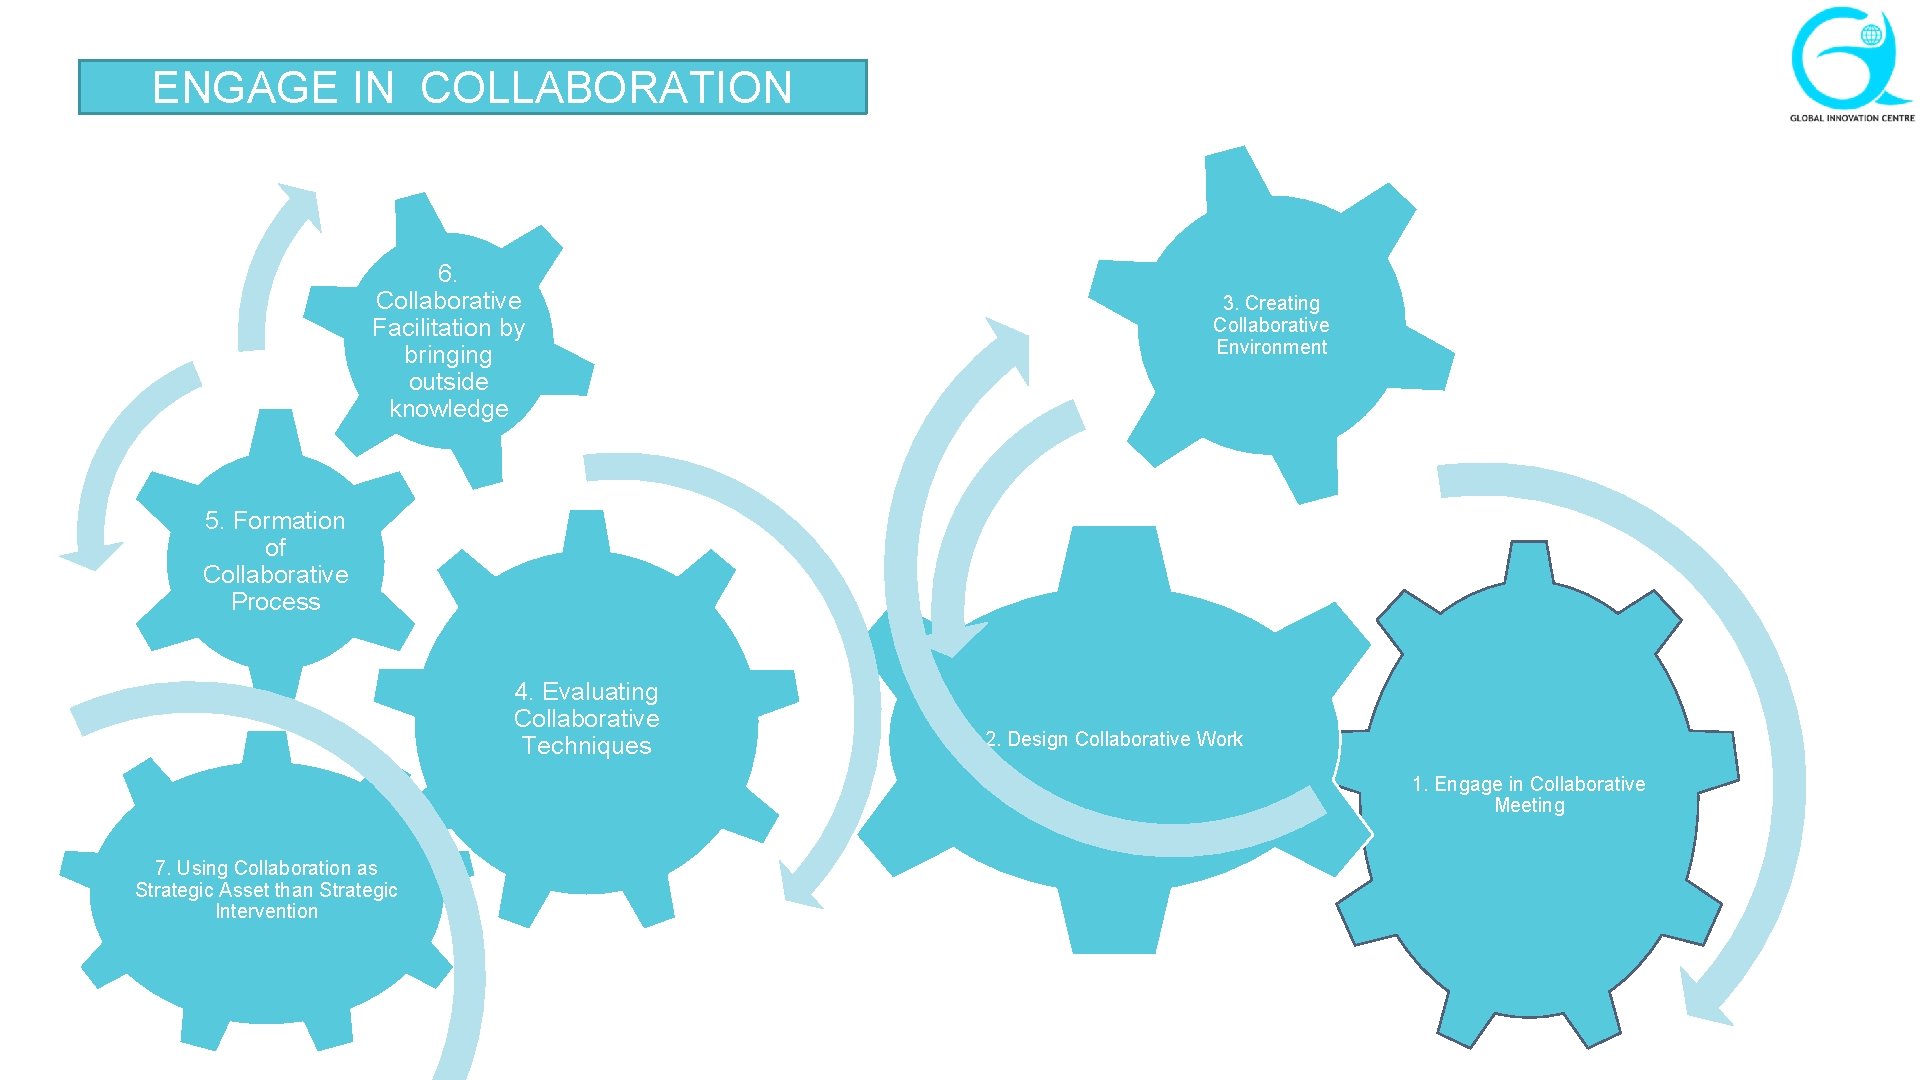 ENGAGE IN COLLABORATION 6. Collaborative Facilitation by bringing outside knowledge 3. Creating Collaborative Environment